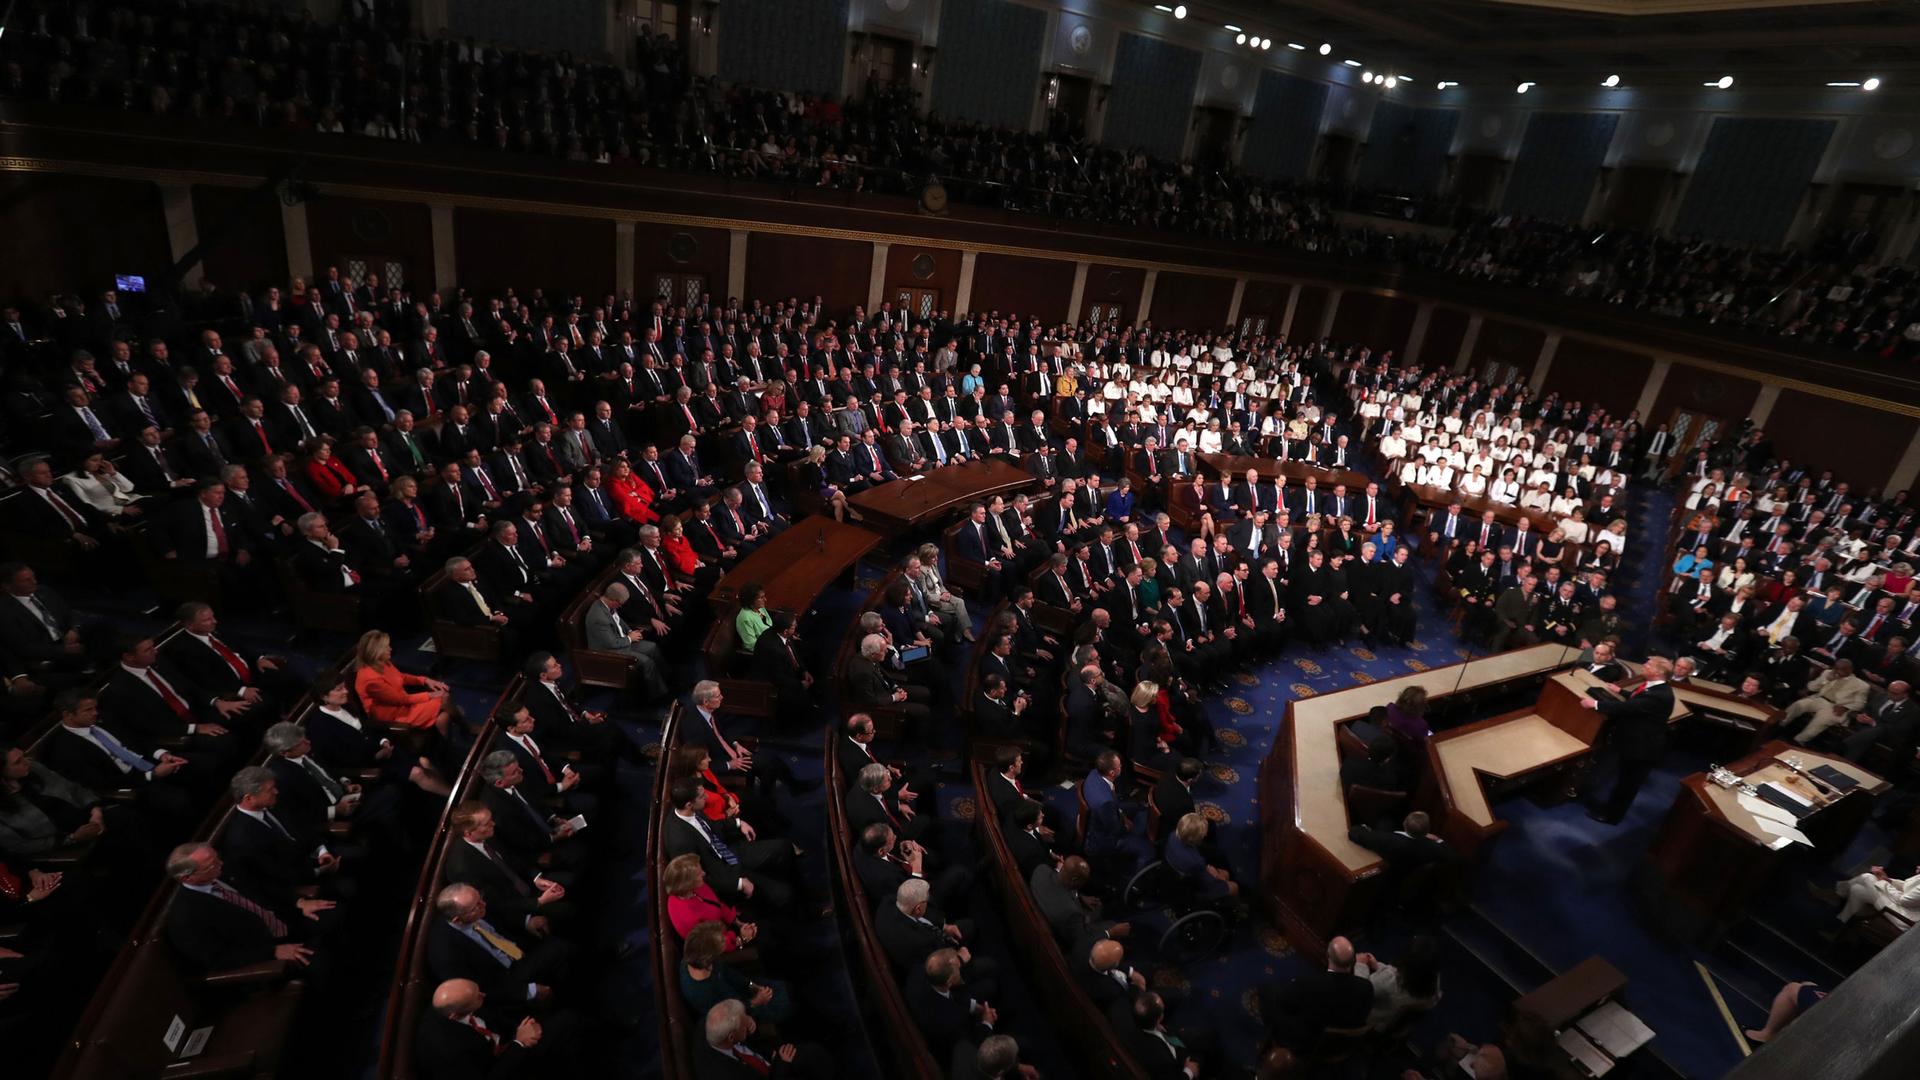 Congress is full of people as Trump gives his second State of the Union address